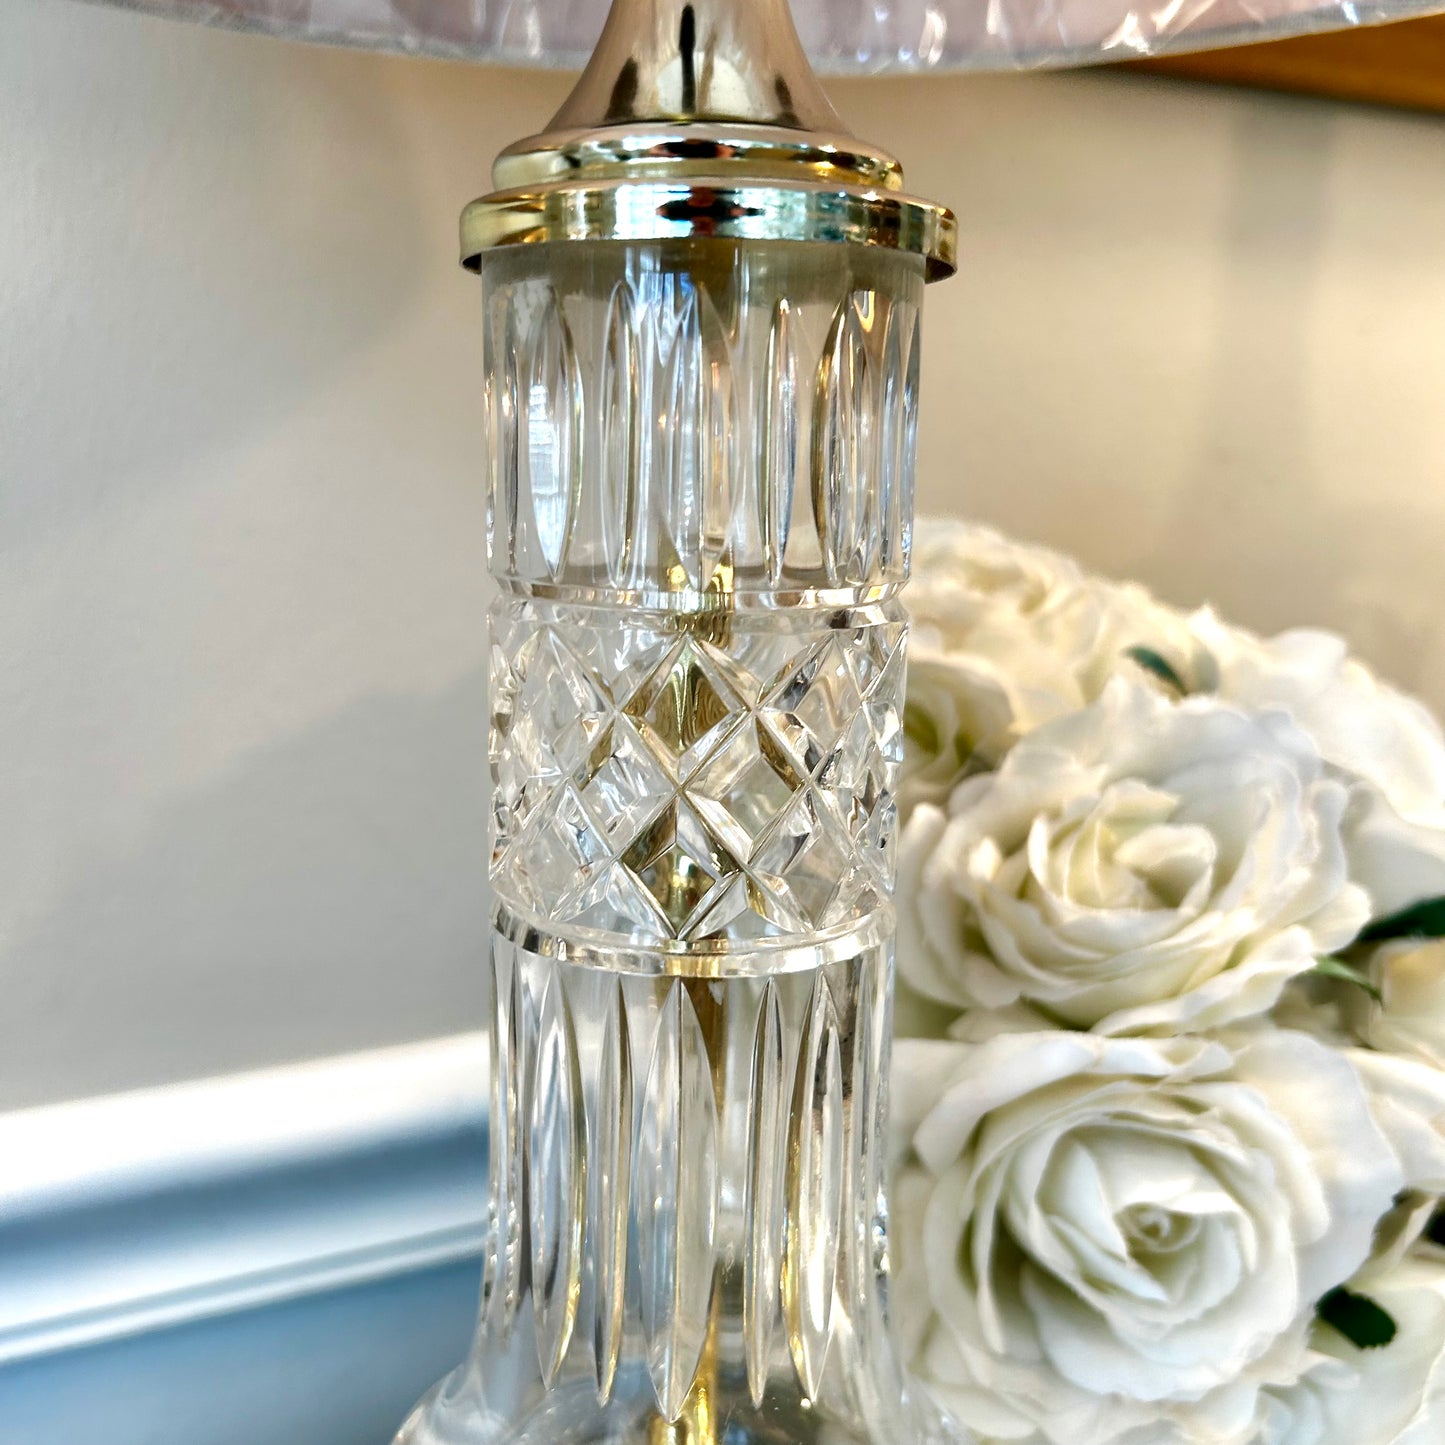 Sparkling vintage crystal and brass fretwork lamp with new shade